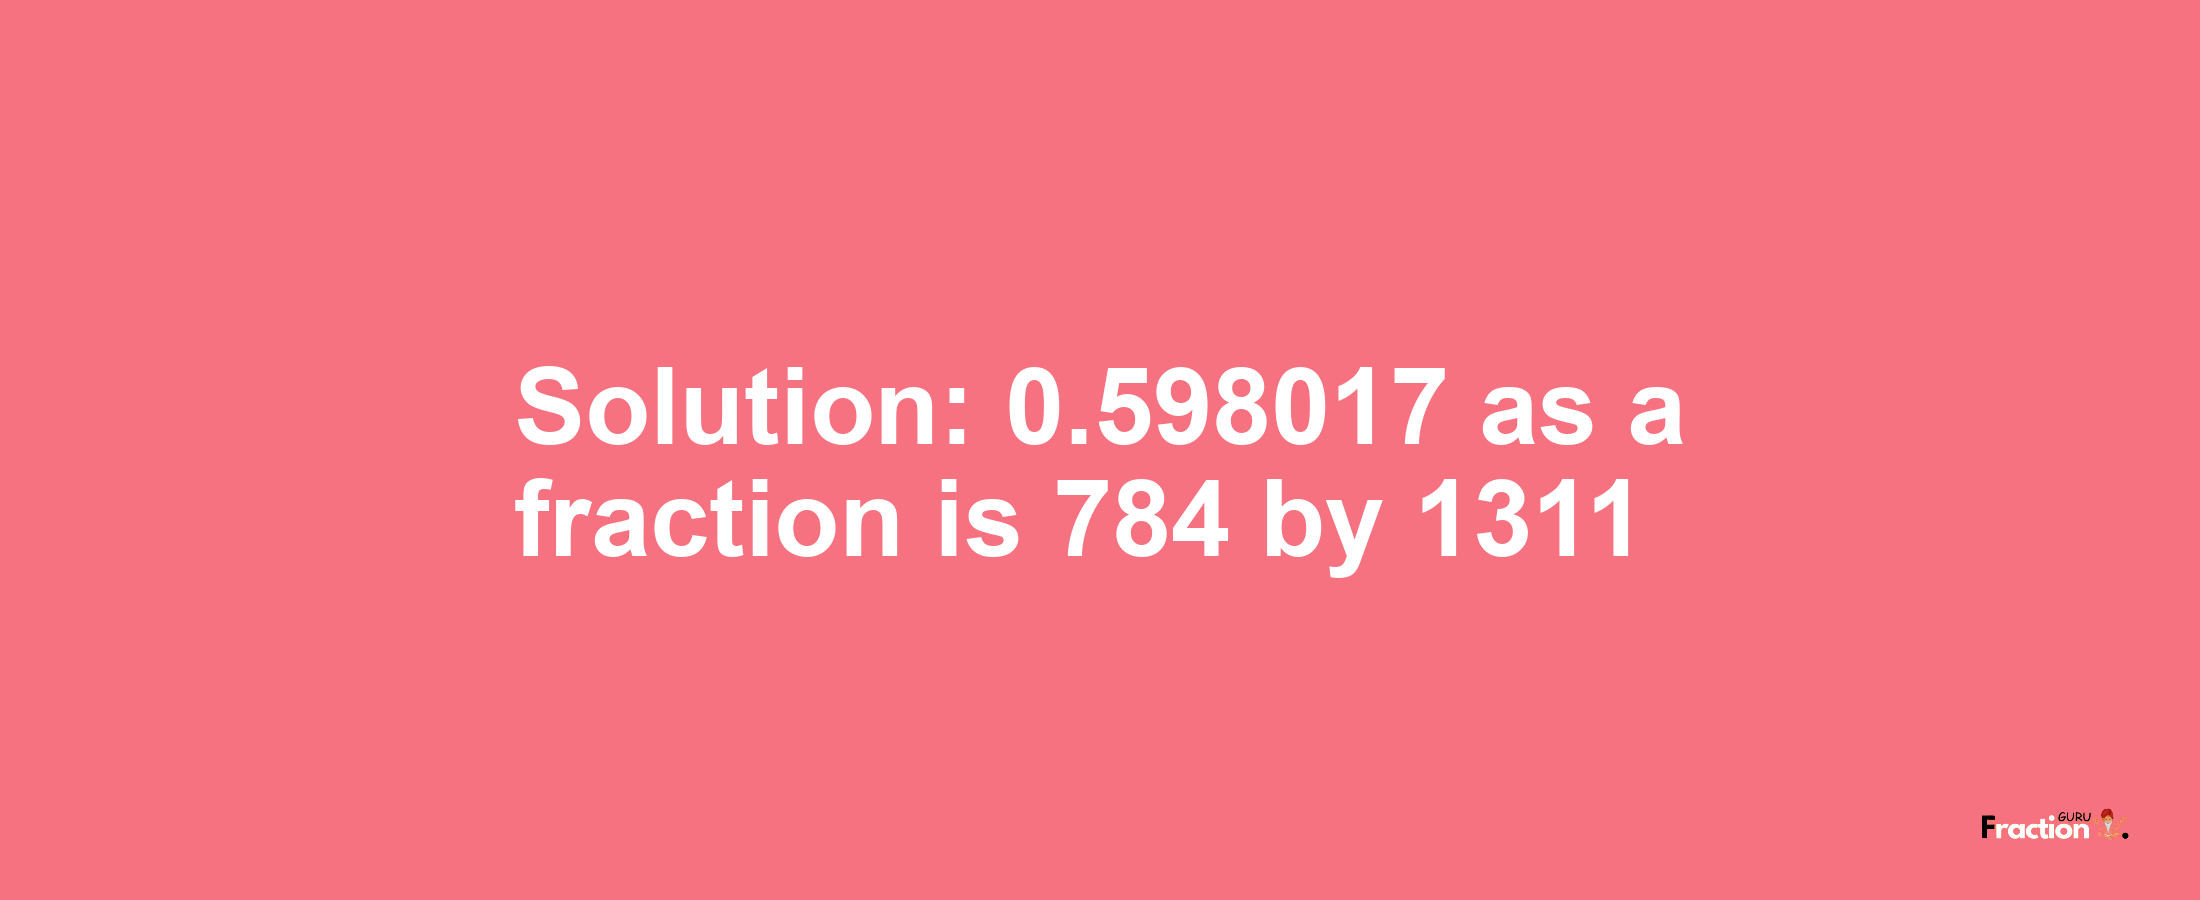 Solution:0.598017 as a fraction is 784/1311